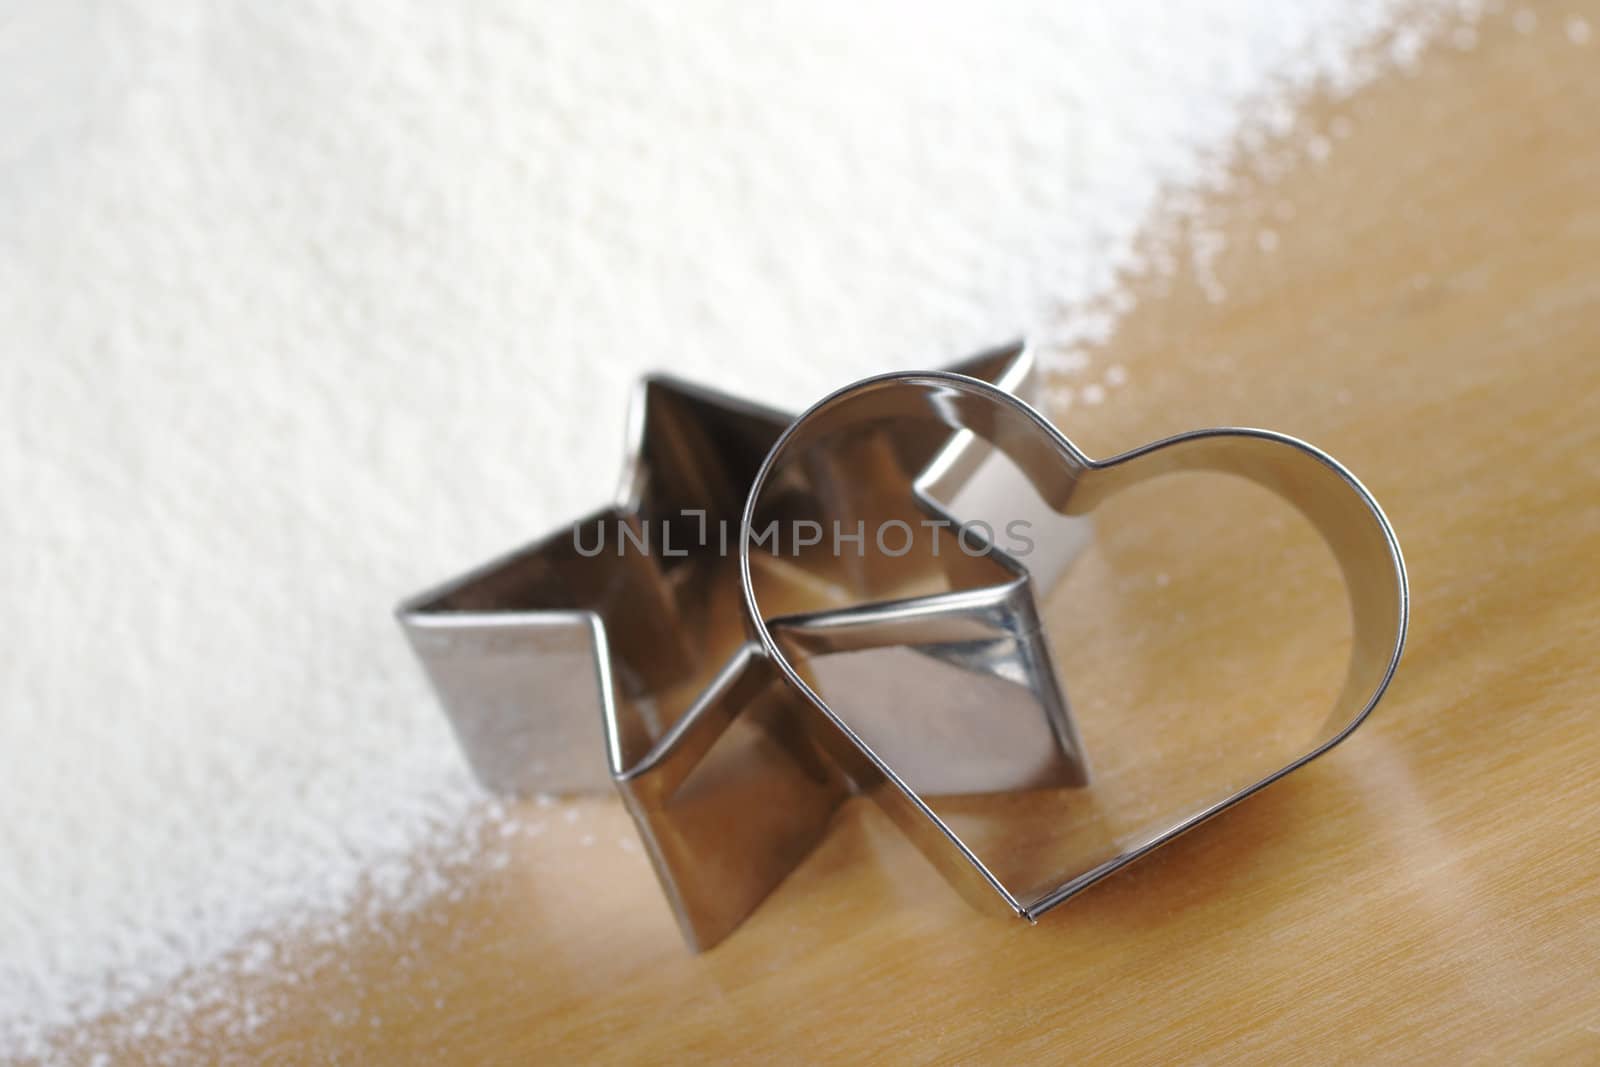 Heart and Star Shaped Cookie Cutters by ildi